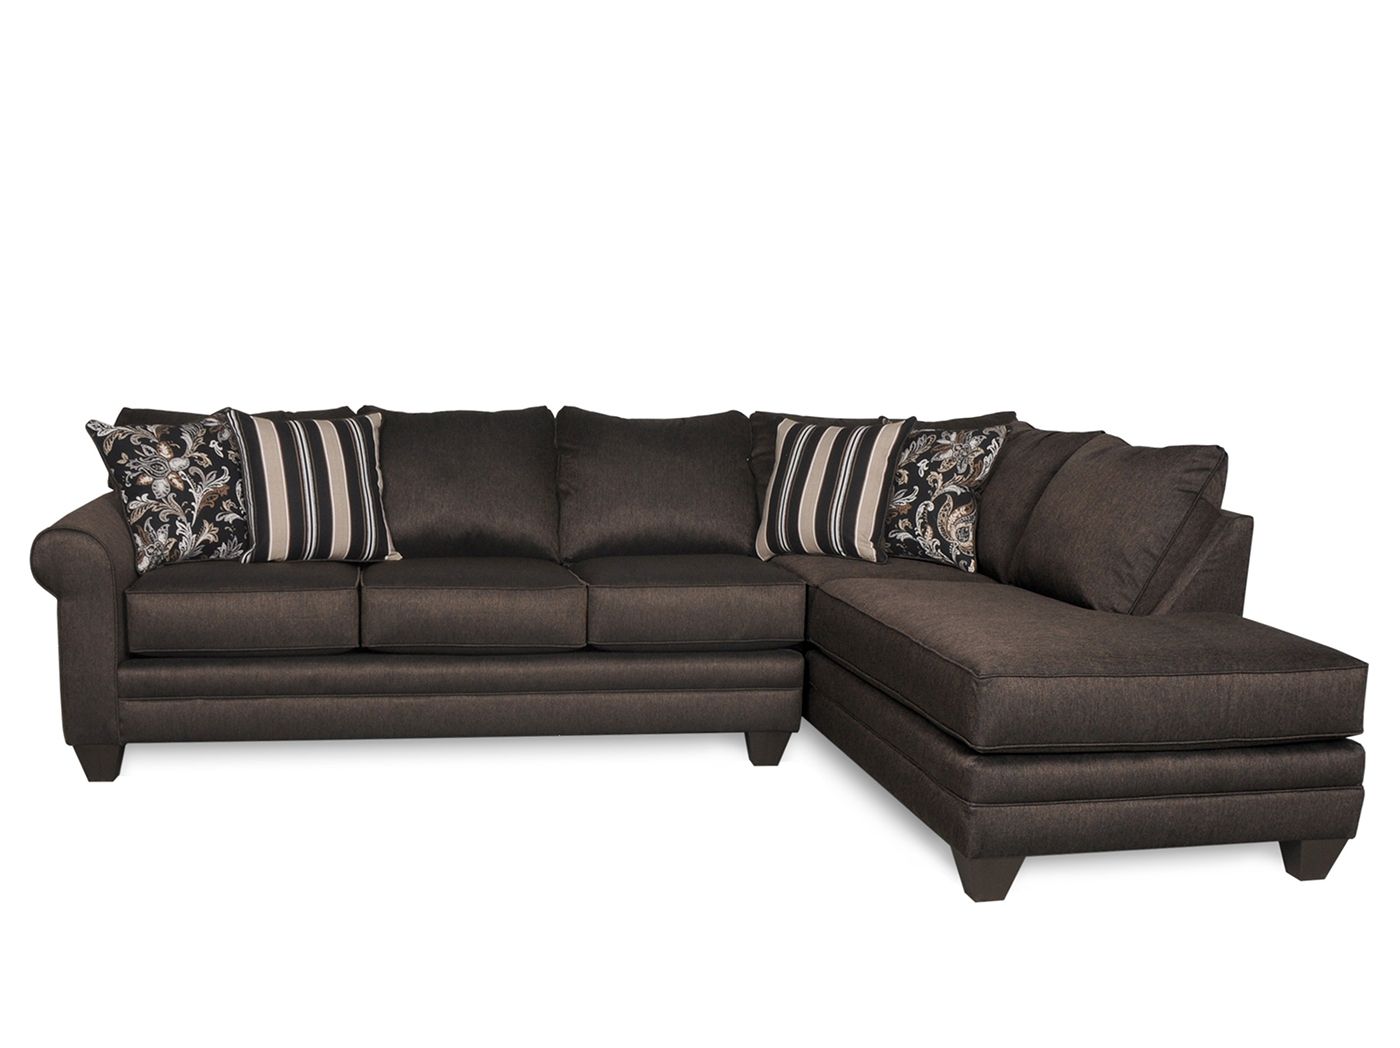 Living Room – Sectionals | Steinhafels In Kiara Sofa Chairs (View 21 of 25)